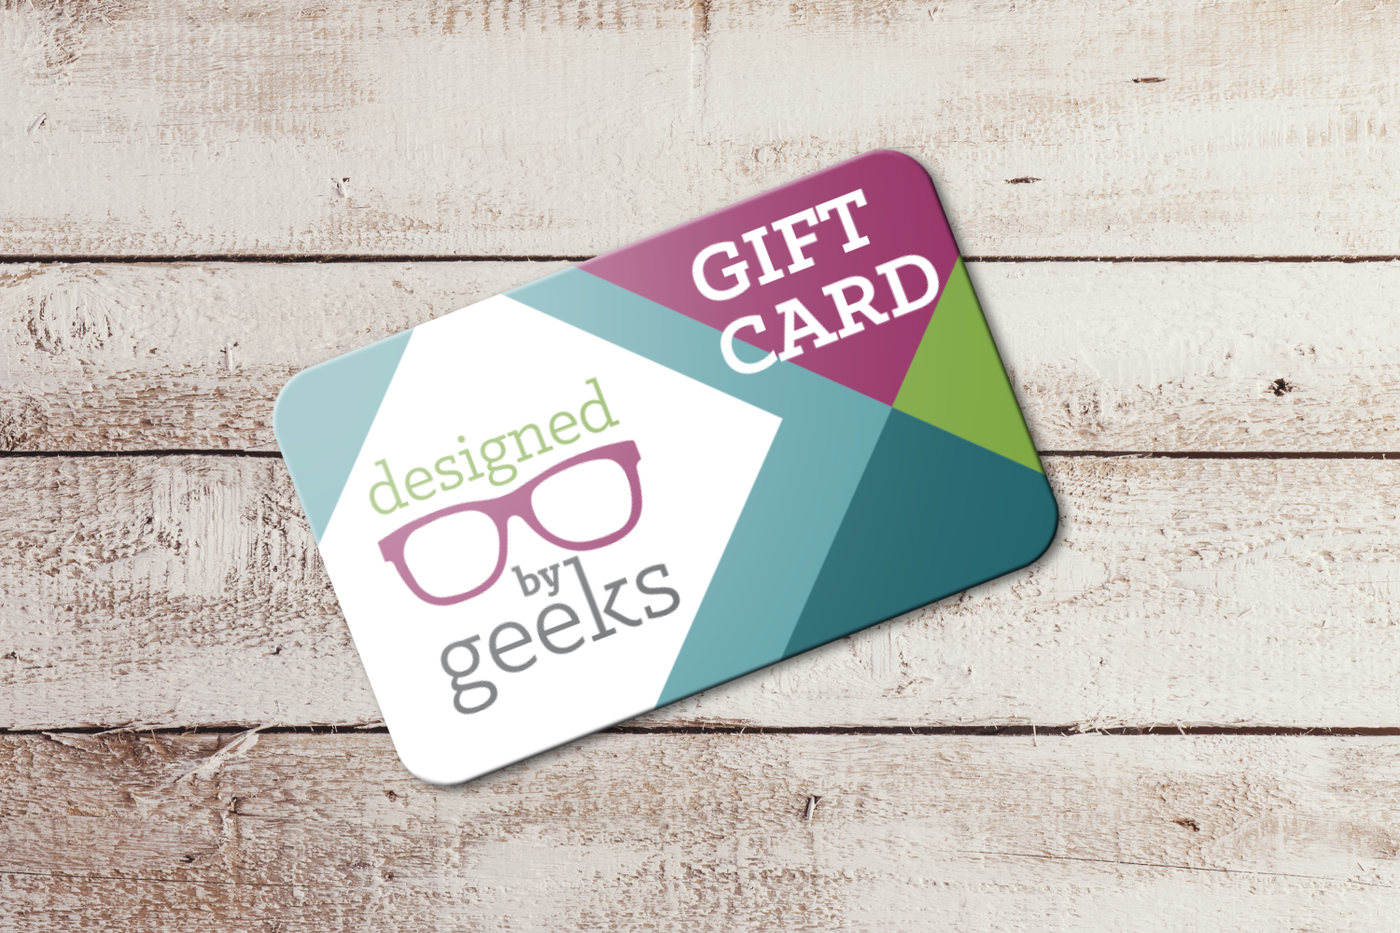 Gift card laying on a wood surface. It has the Designed by Geeks logo and geometric graphics in the brand colors.